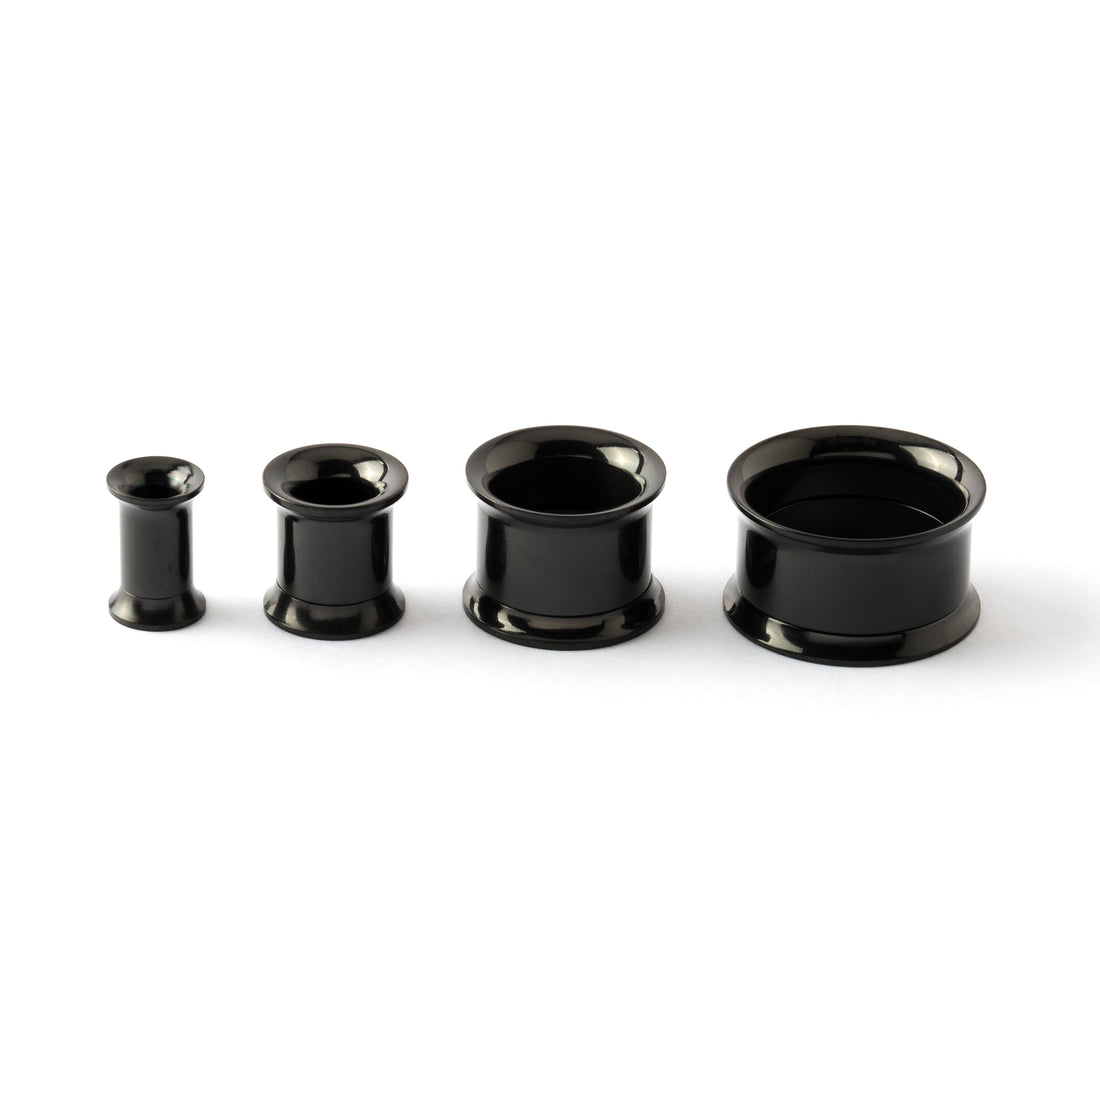 shiny black surgical steel plug tunnel in variety of sizes